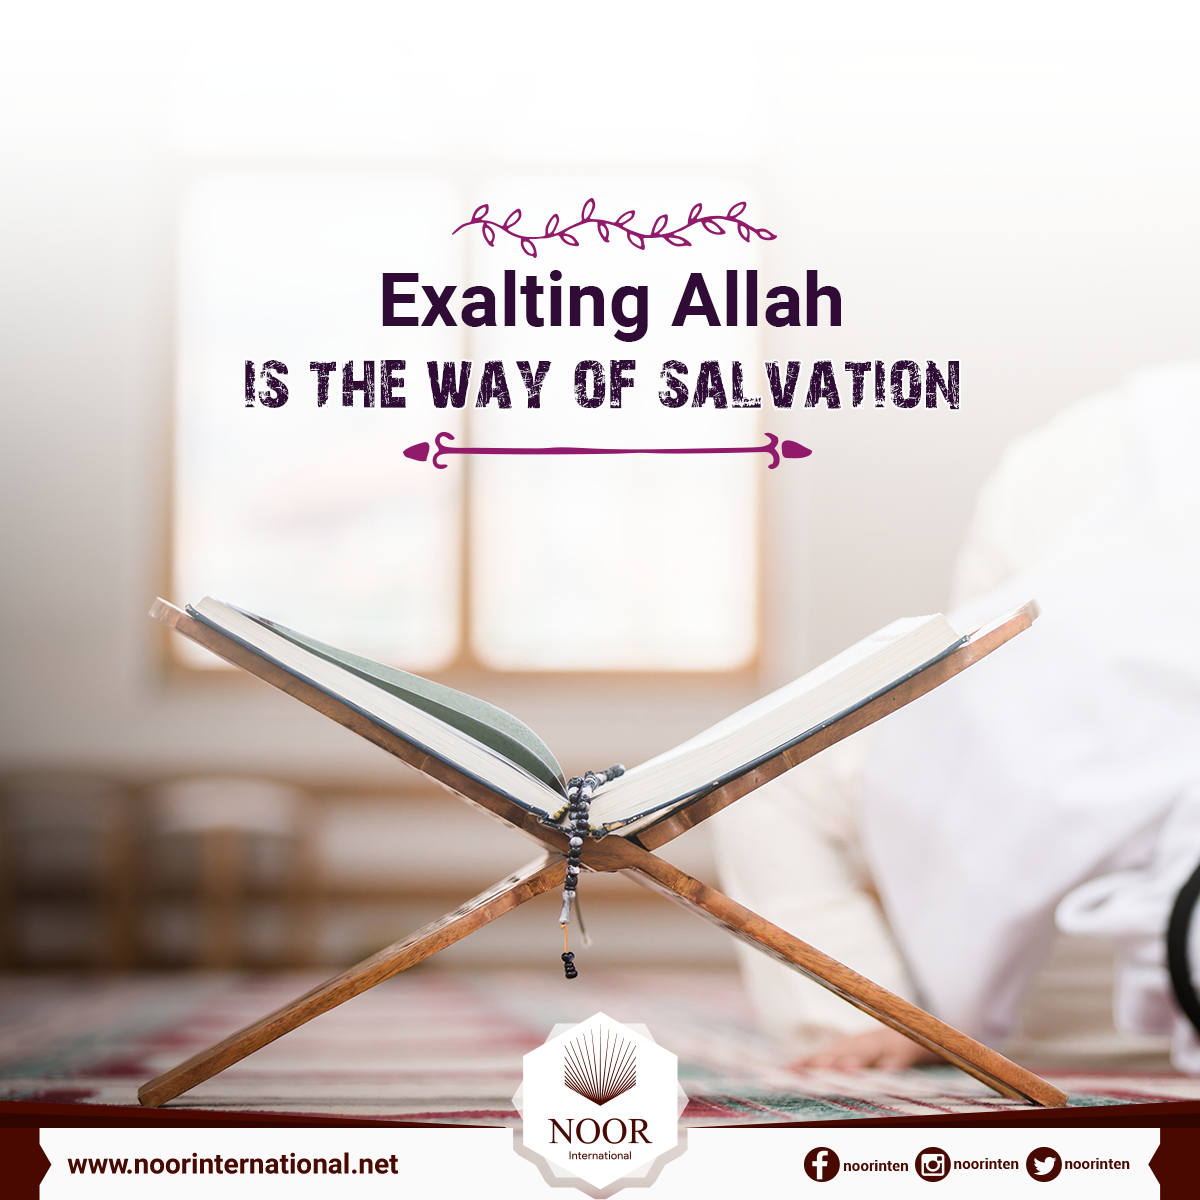 Exalting Allah is the way of salvation